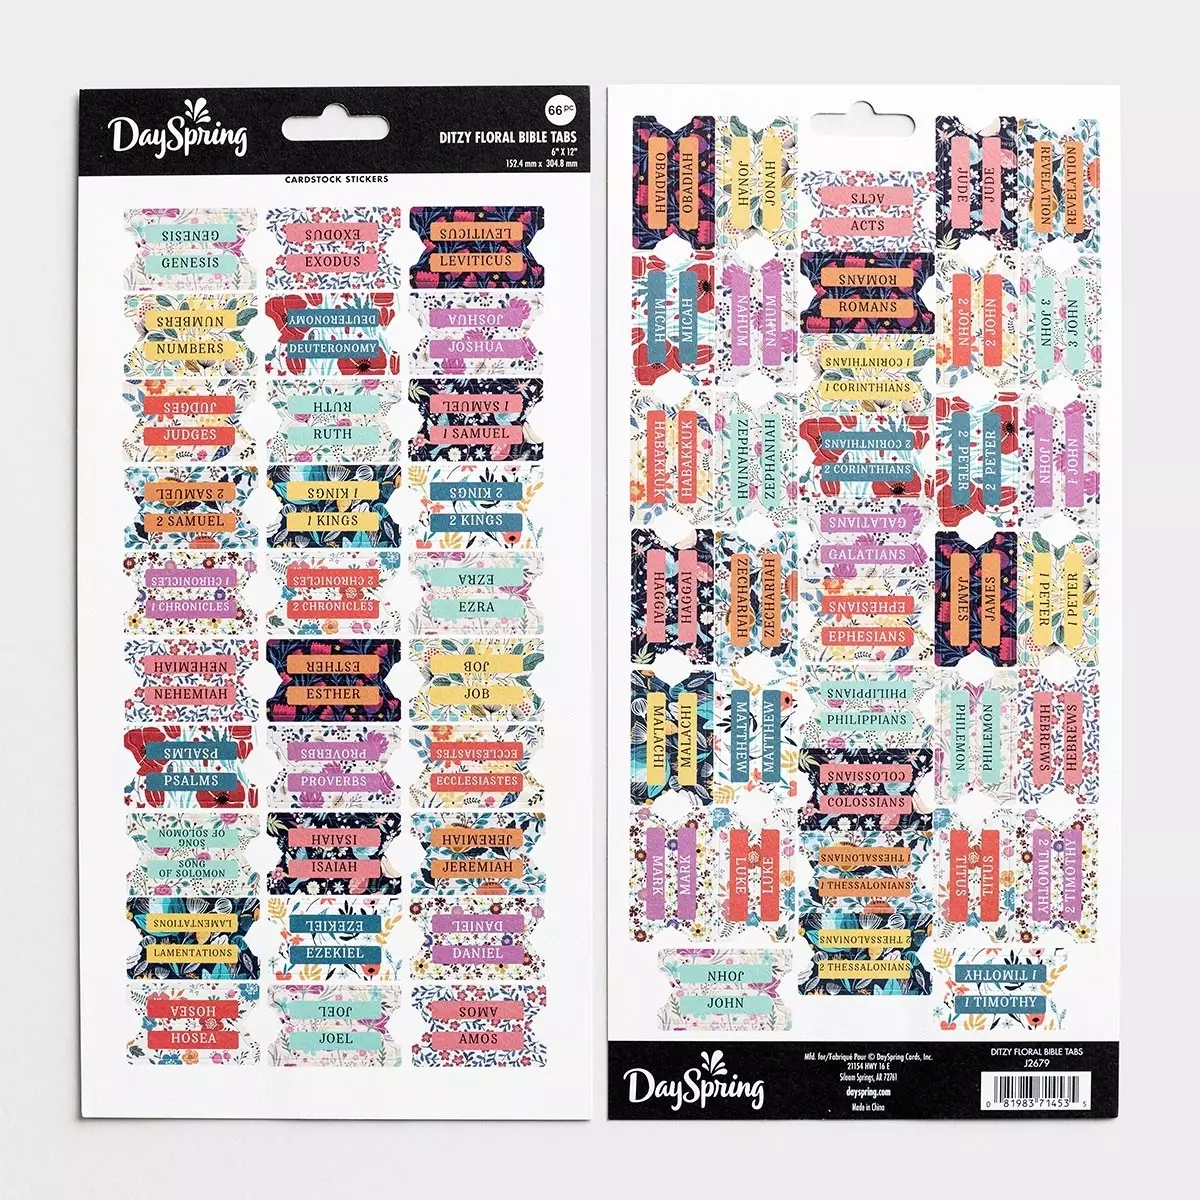 Ditzy Floral Bible Tabs